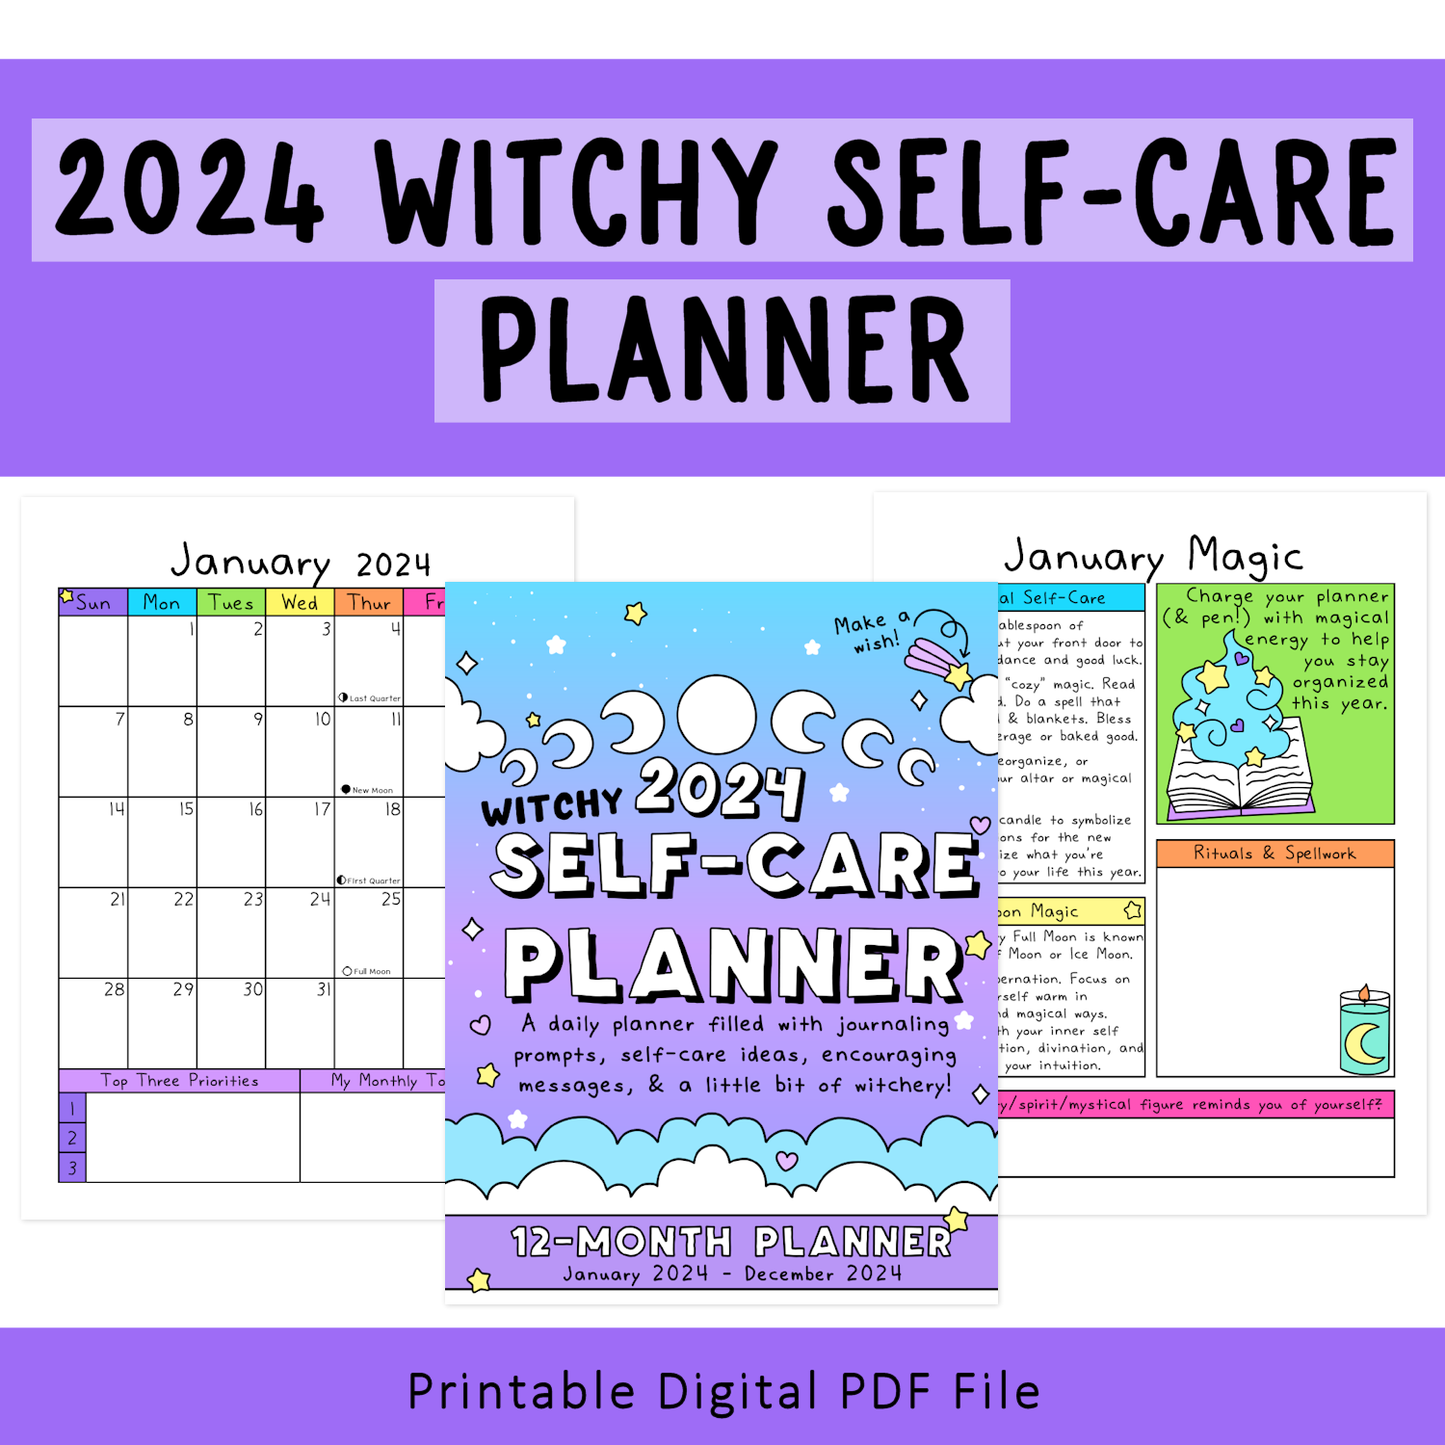 2024 Witchy Self-Care Planner